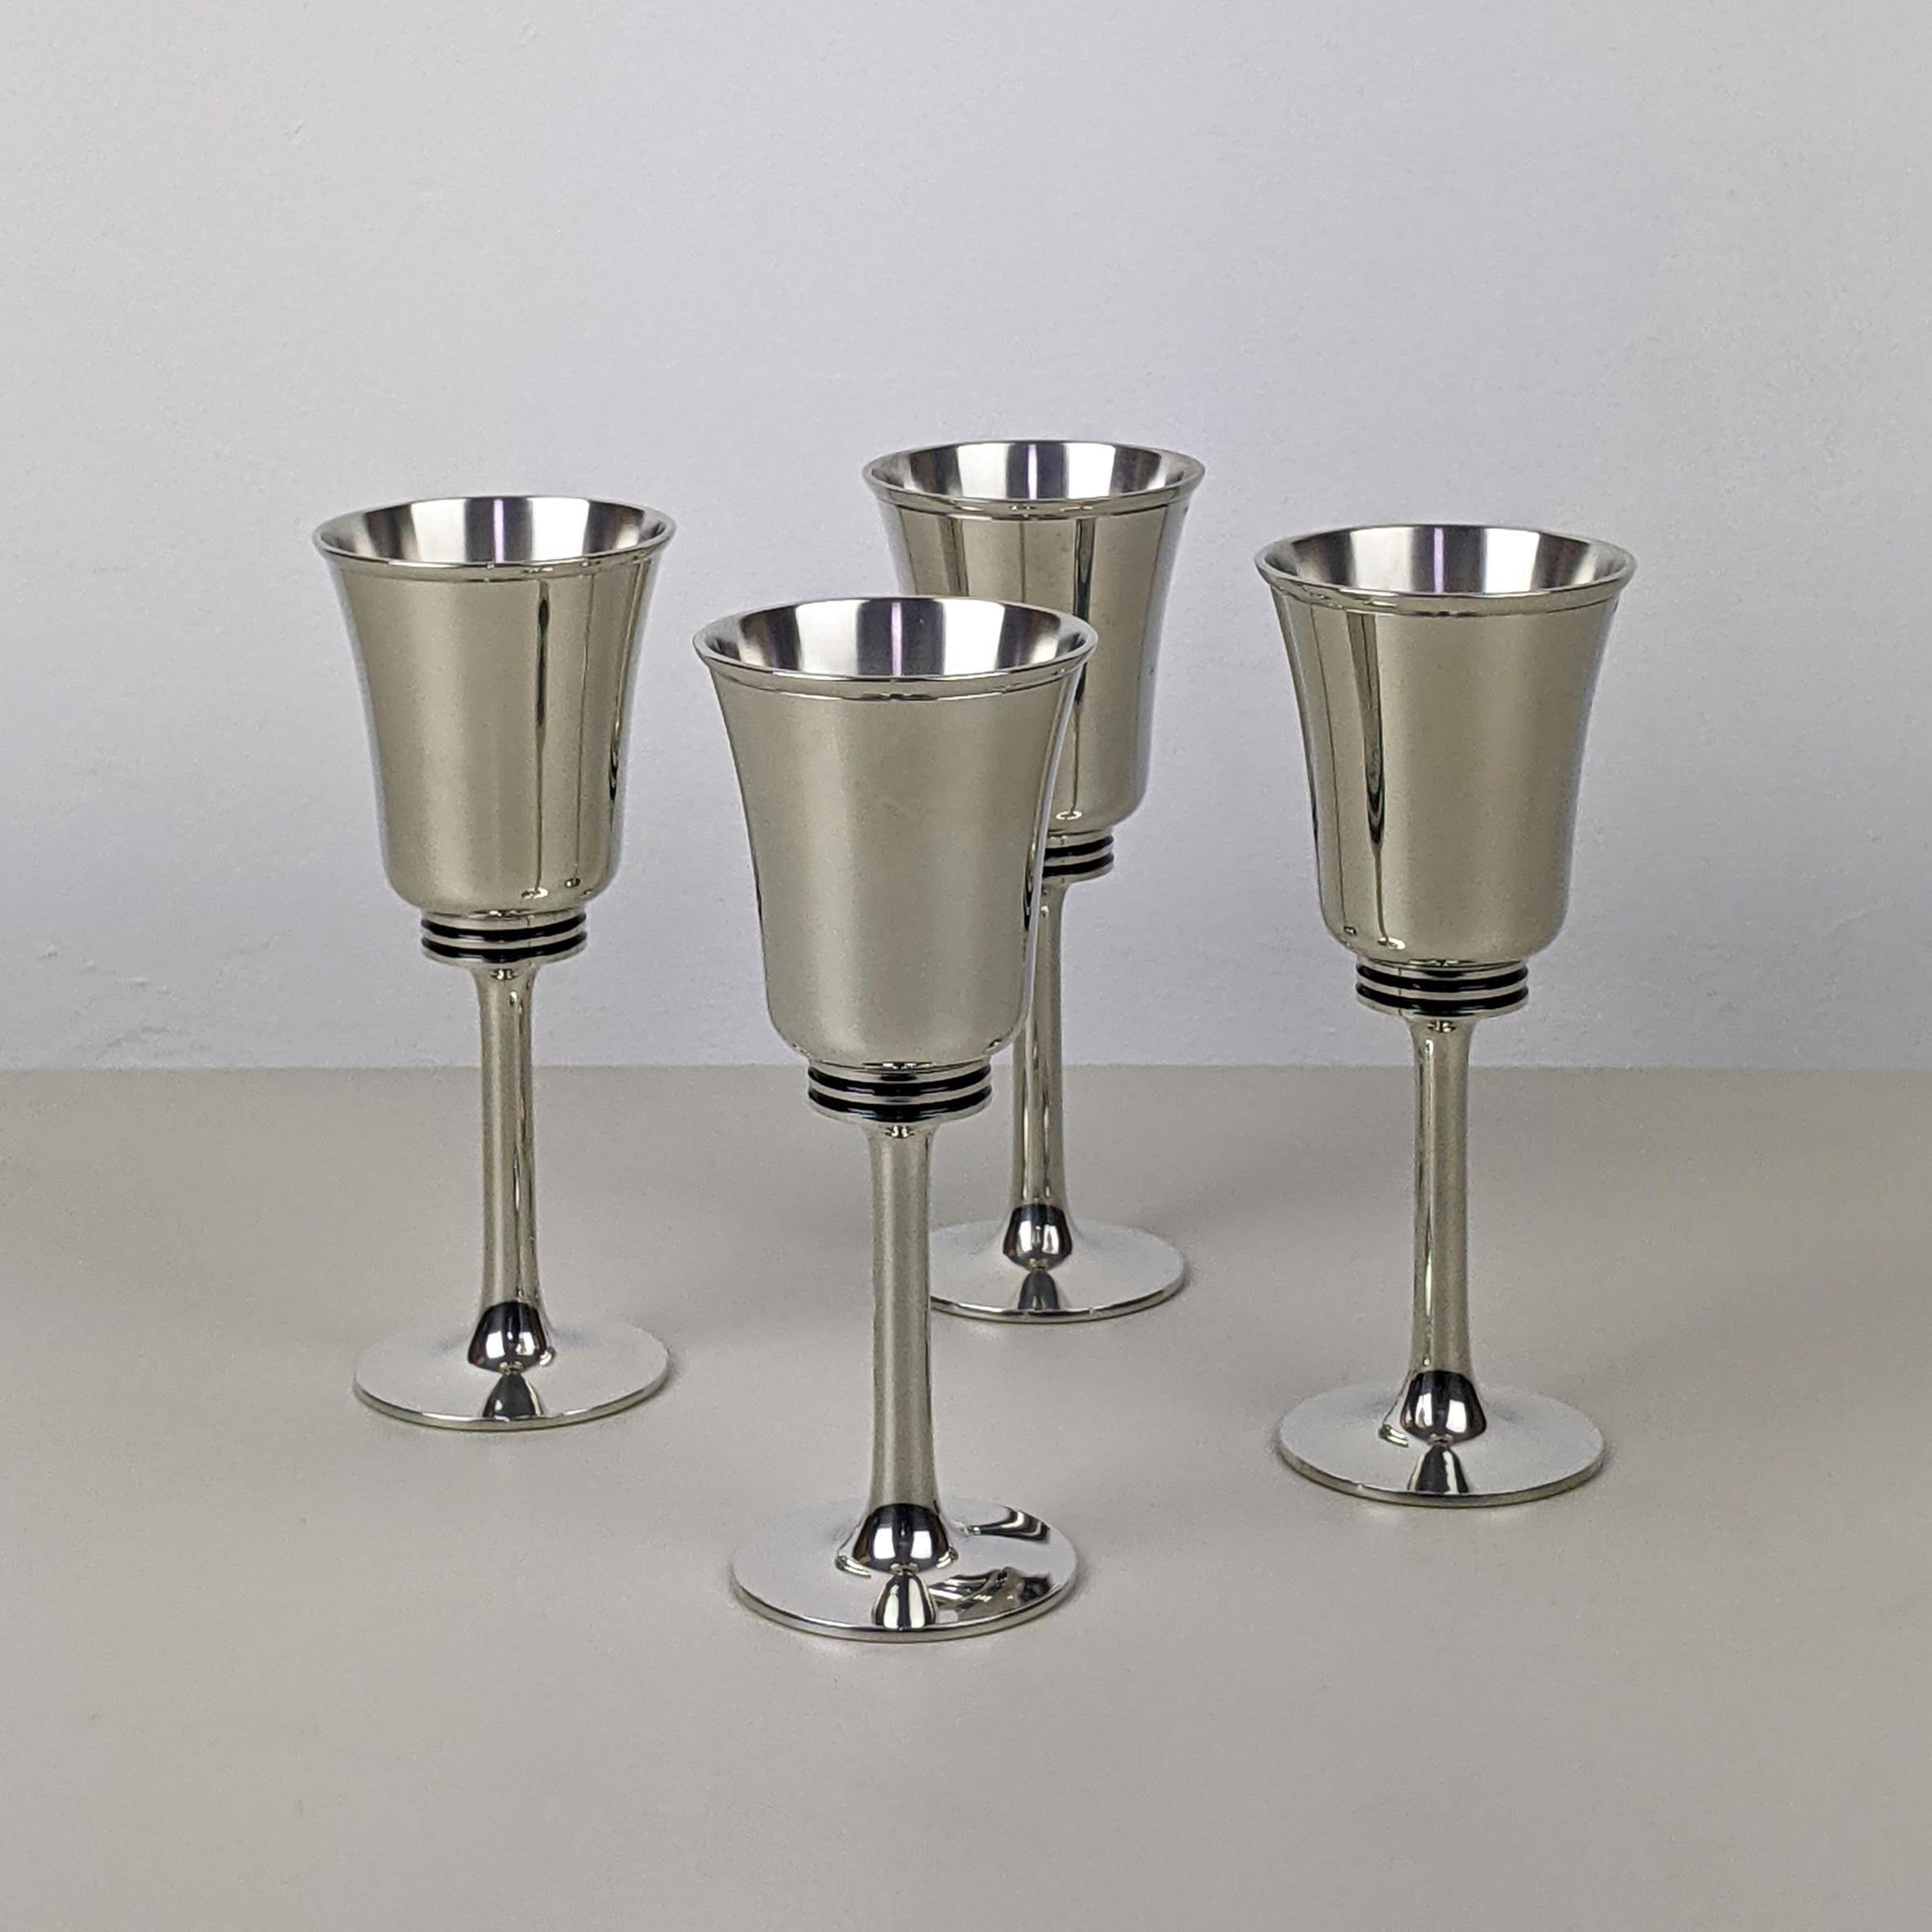 Gerald Benney for Selangor Pewter (Royal Selangor), designed c.1986
Set of 4 pewter goblets

A beautiful boxed set in excellent un-used condition. Original boxes, packaging and leaflets.

Dimensions, approx..:
Goblets, each: Height 15.5cm,